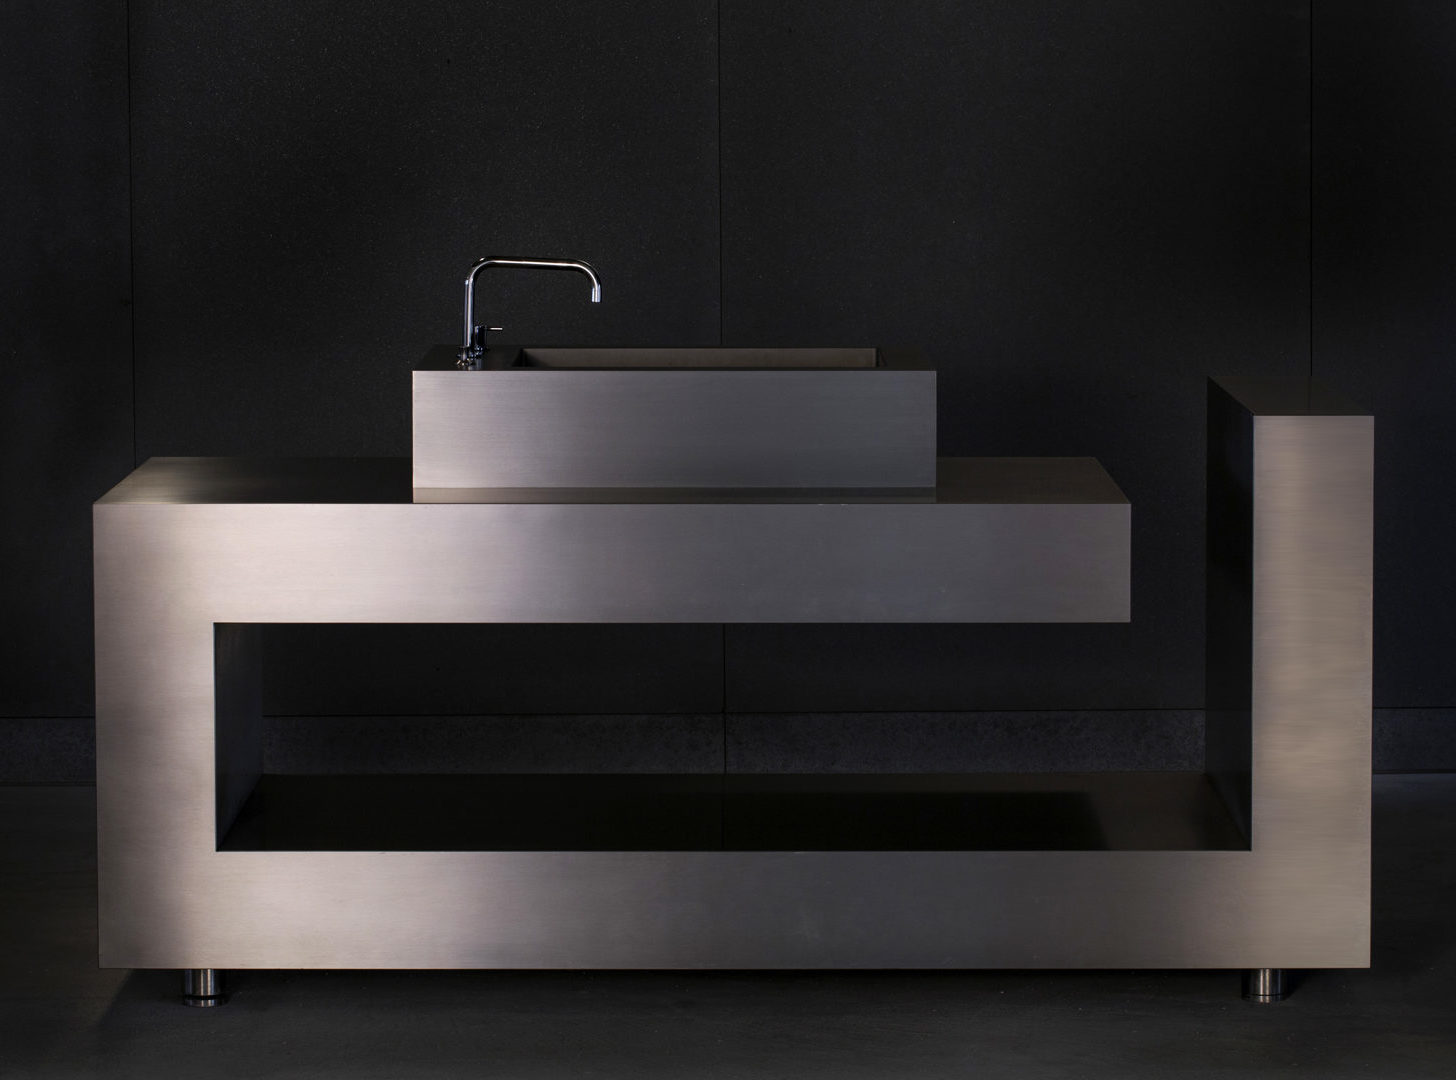 Strato_design_PEZZO_UNICO with sink_mat stainless steel_01